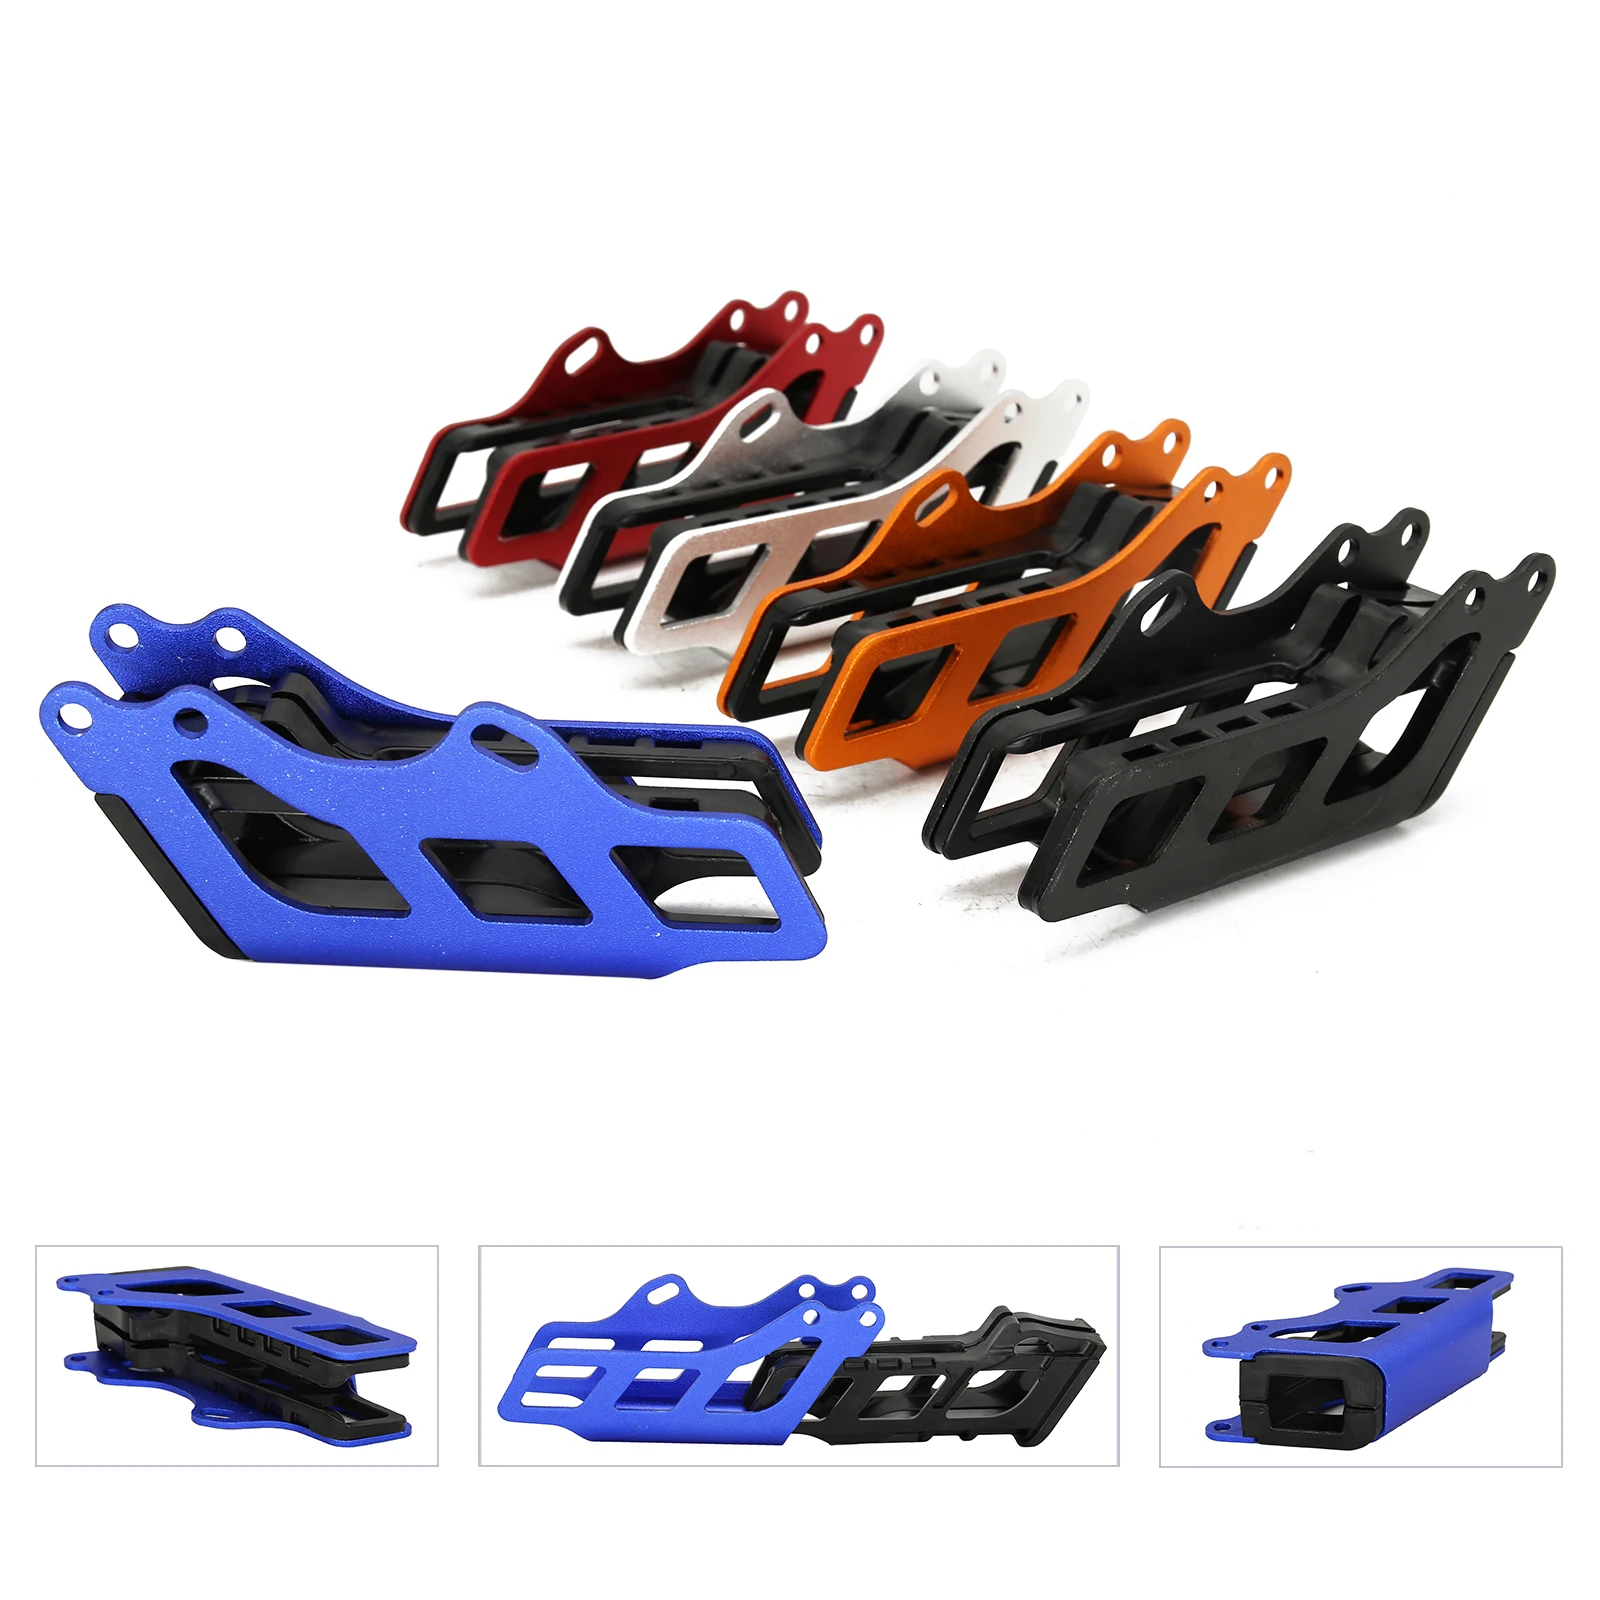 Motorcycle Chain Guide Guard Aluminum Chain Guides And Inner Glue For HONDA CRF250R CRF250RX CRF250X CRF450L CRF450R CRF450X CRF